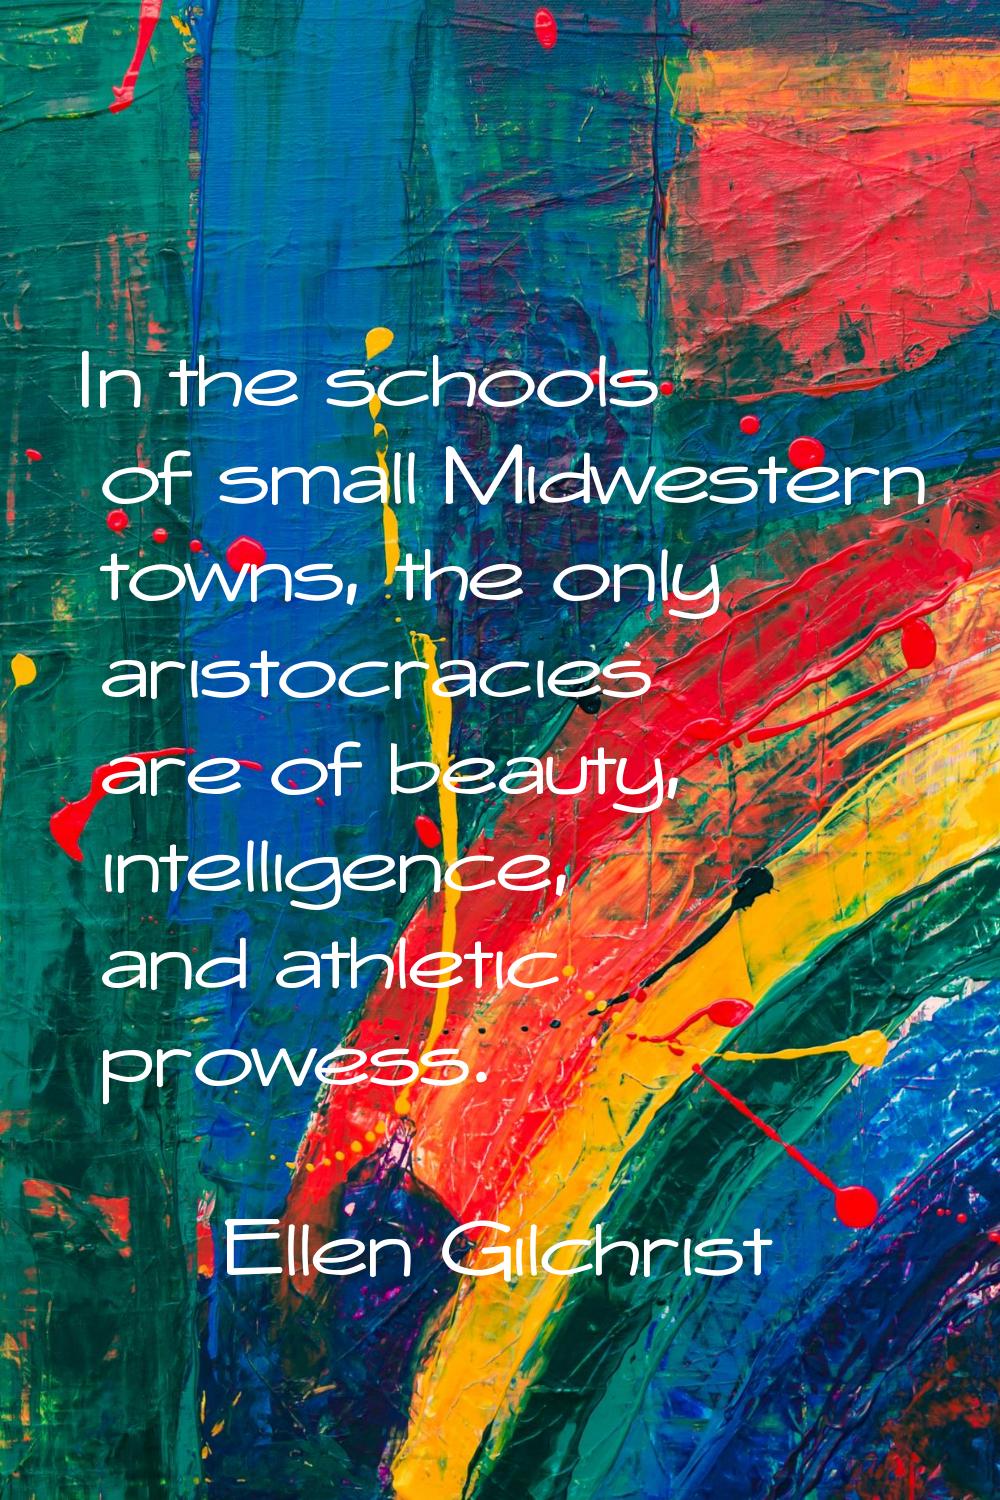 In the schools of small Midwestern towns, the only aristocracies are of beauty, intelligence, and a